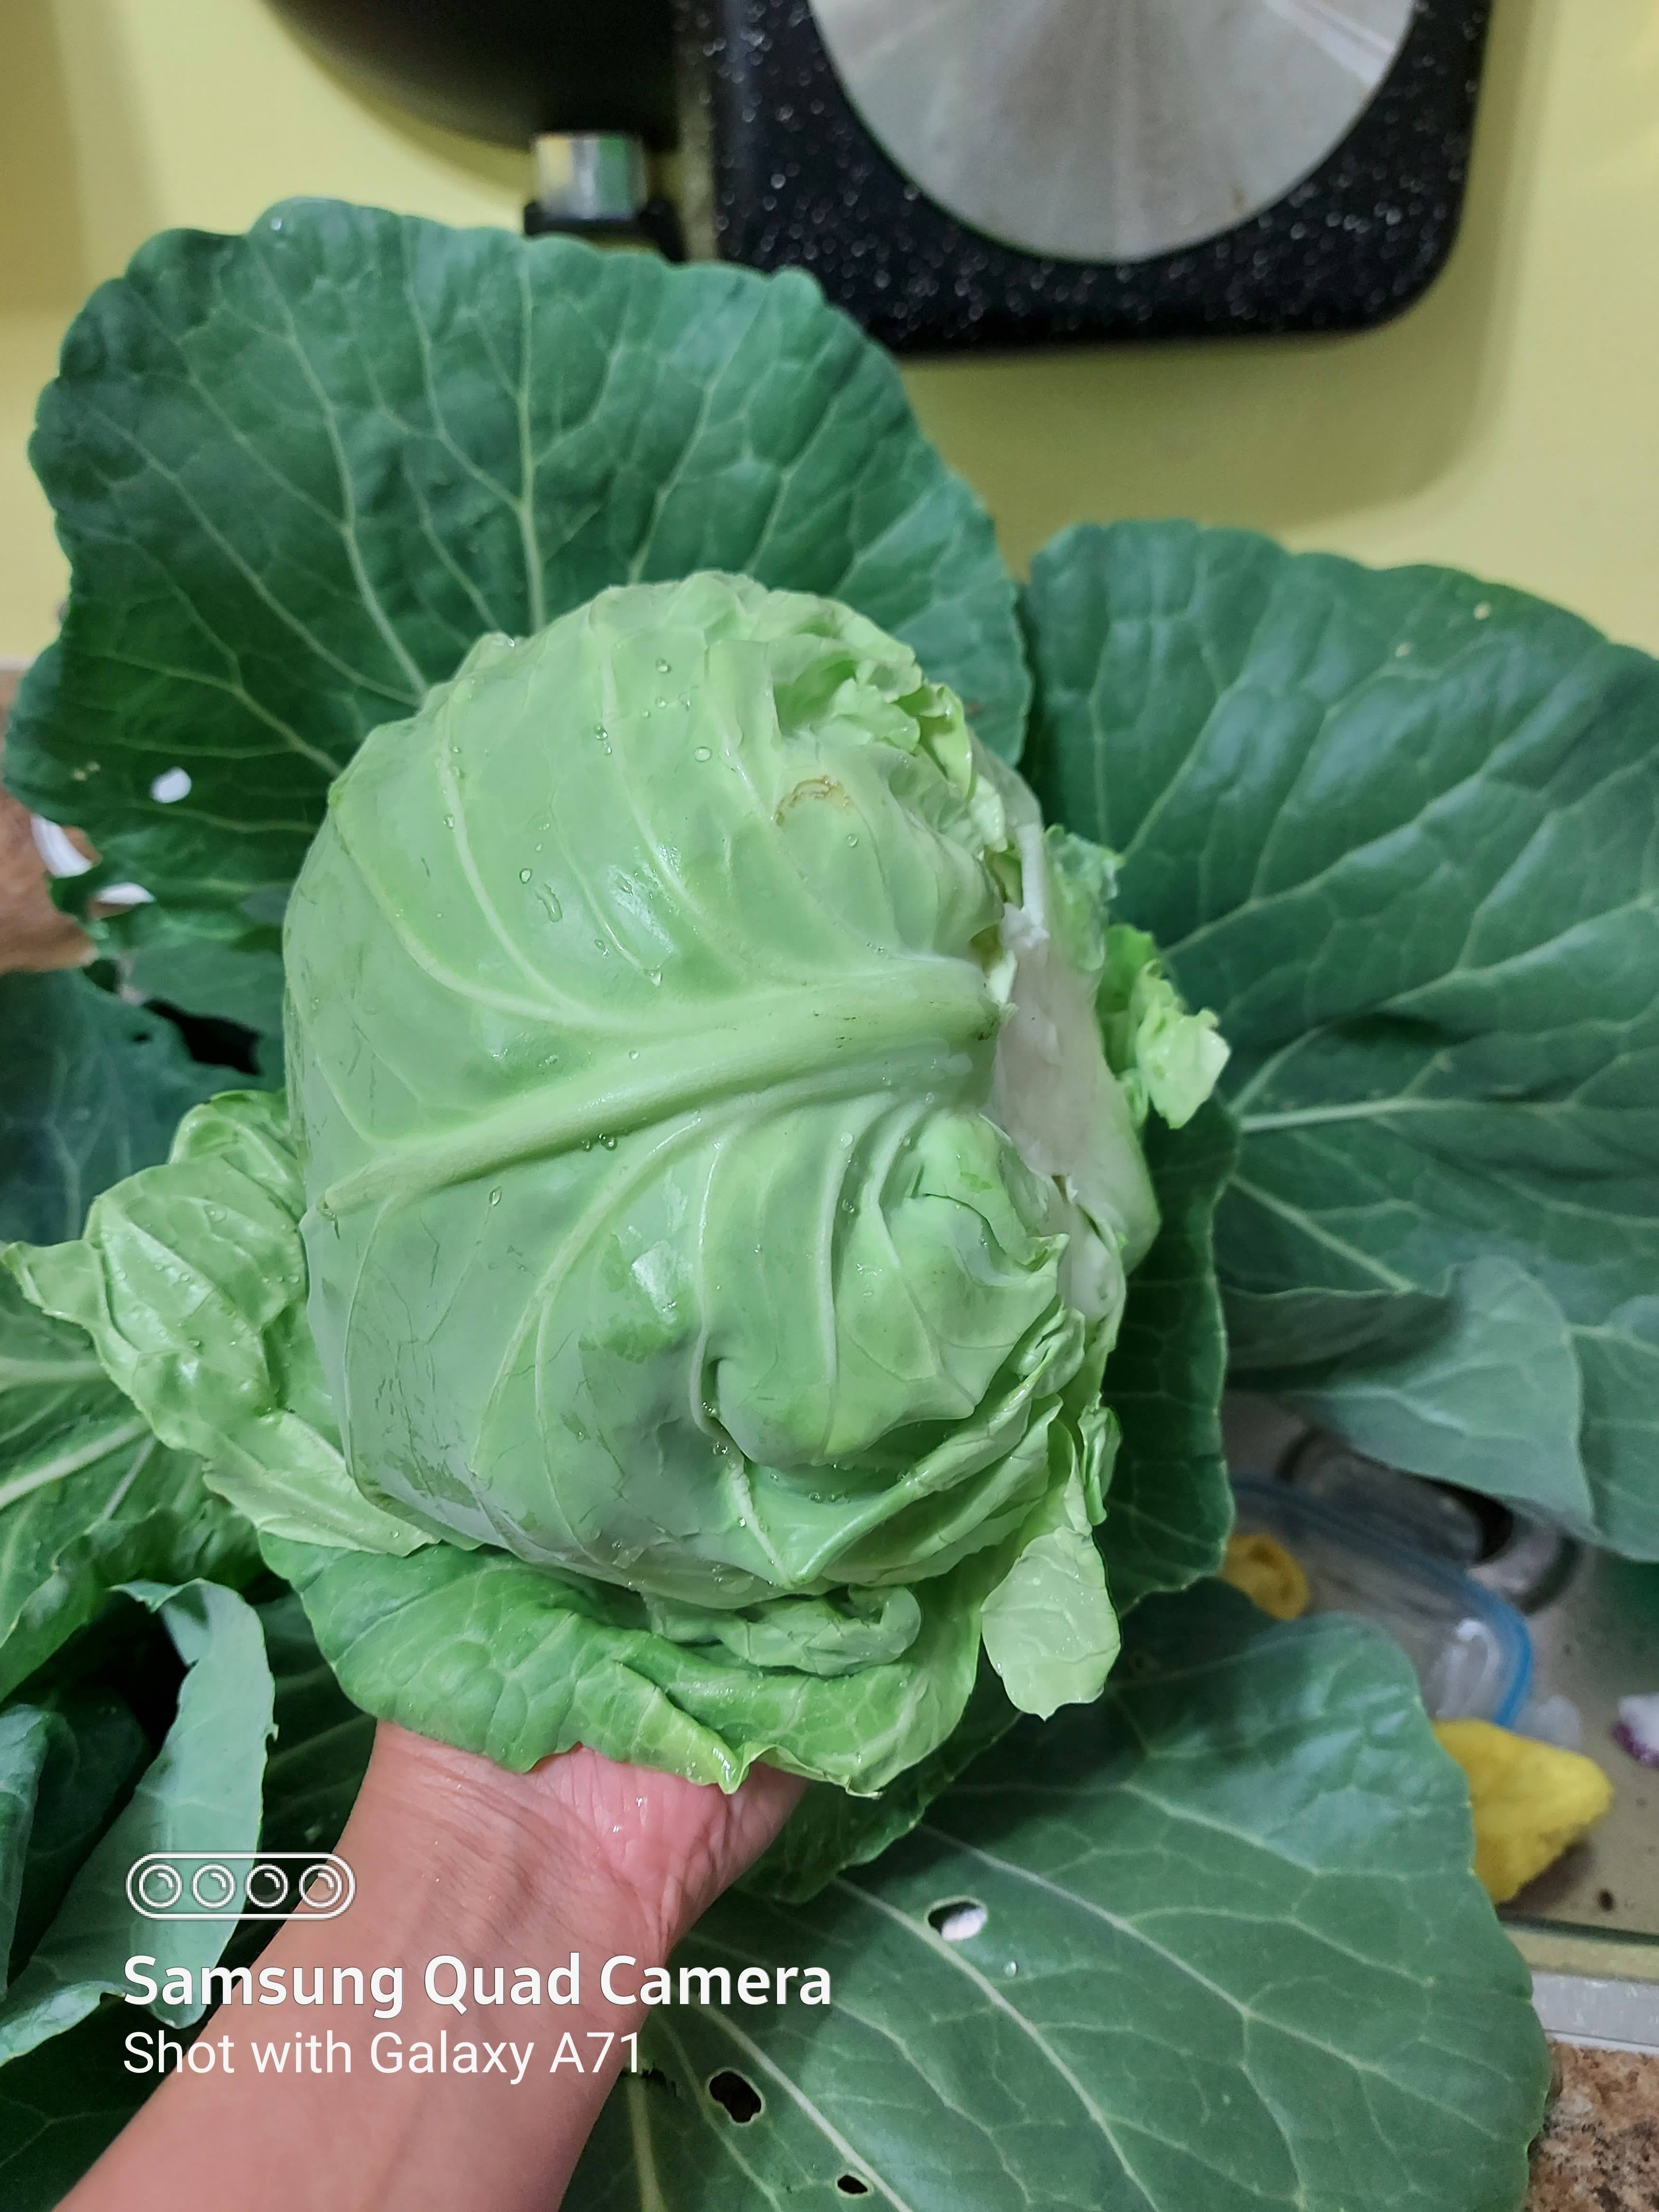 No Chlimicals, no spray. Just organic cabbages grew in my garden during pandemic